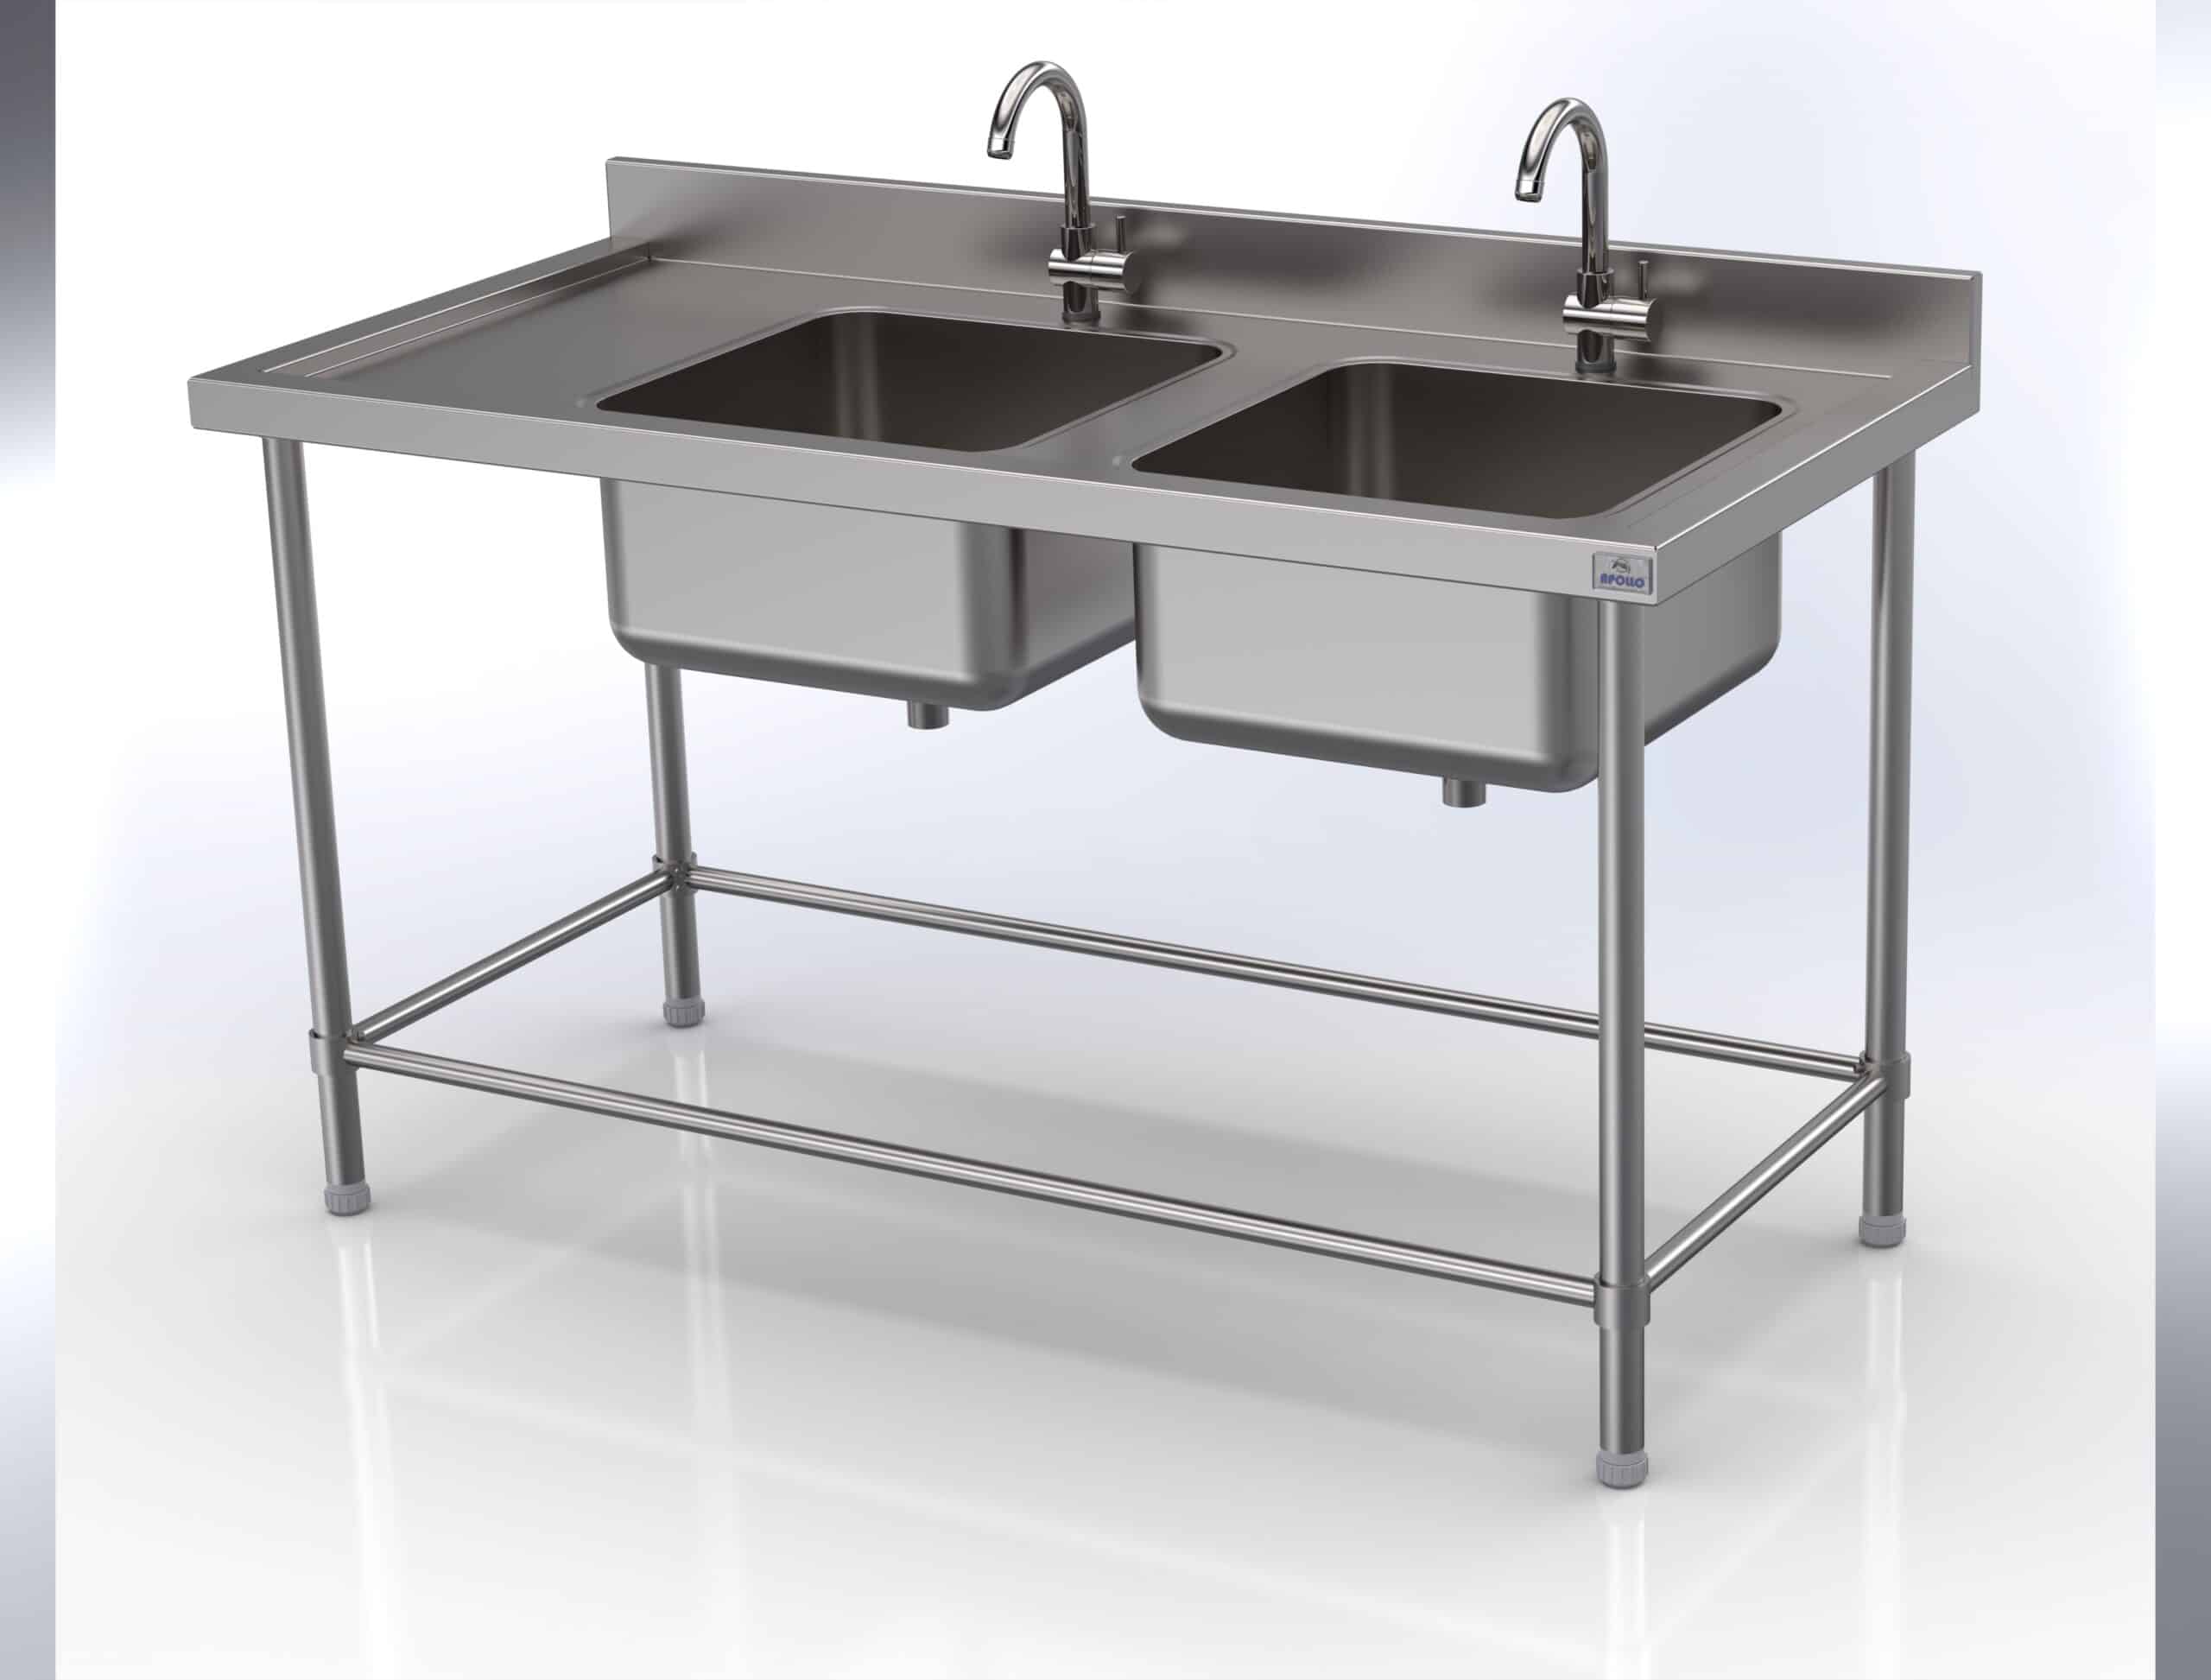 Stainless Steel Kitchen Work Table with Sink